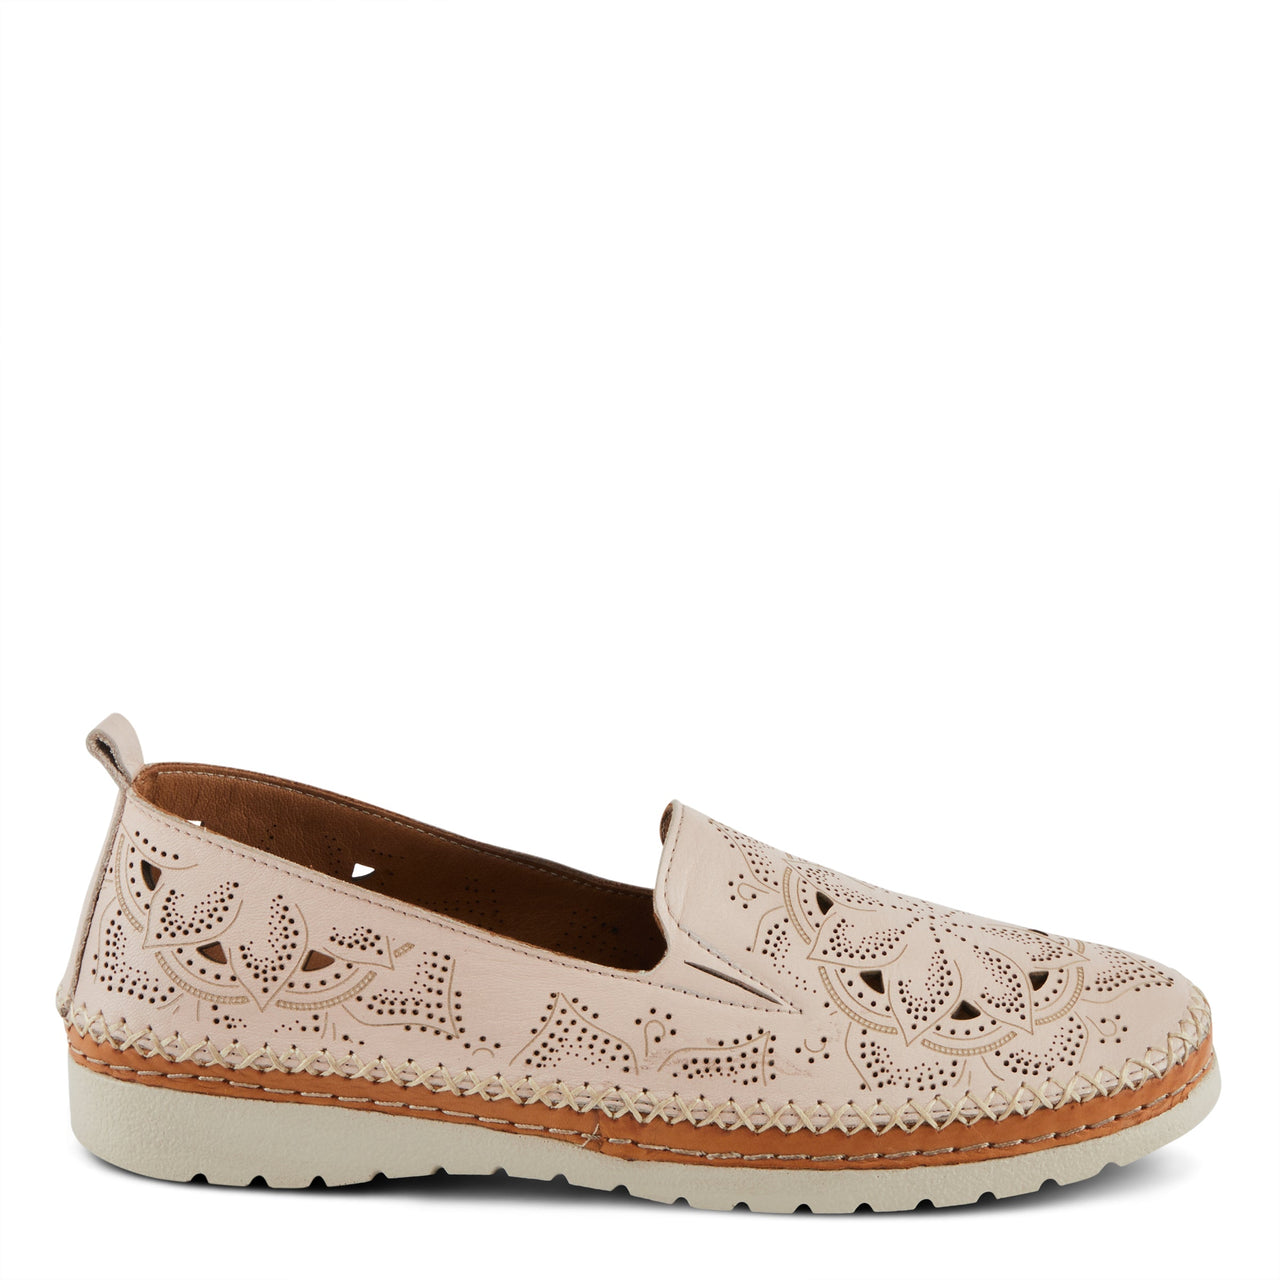 Timeless tan suede shoes with a decorative tassel